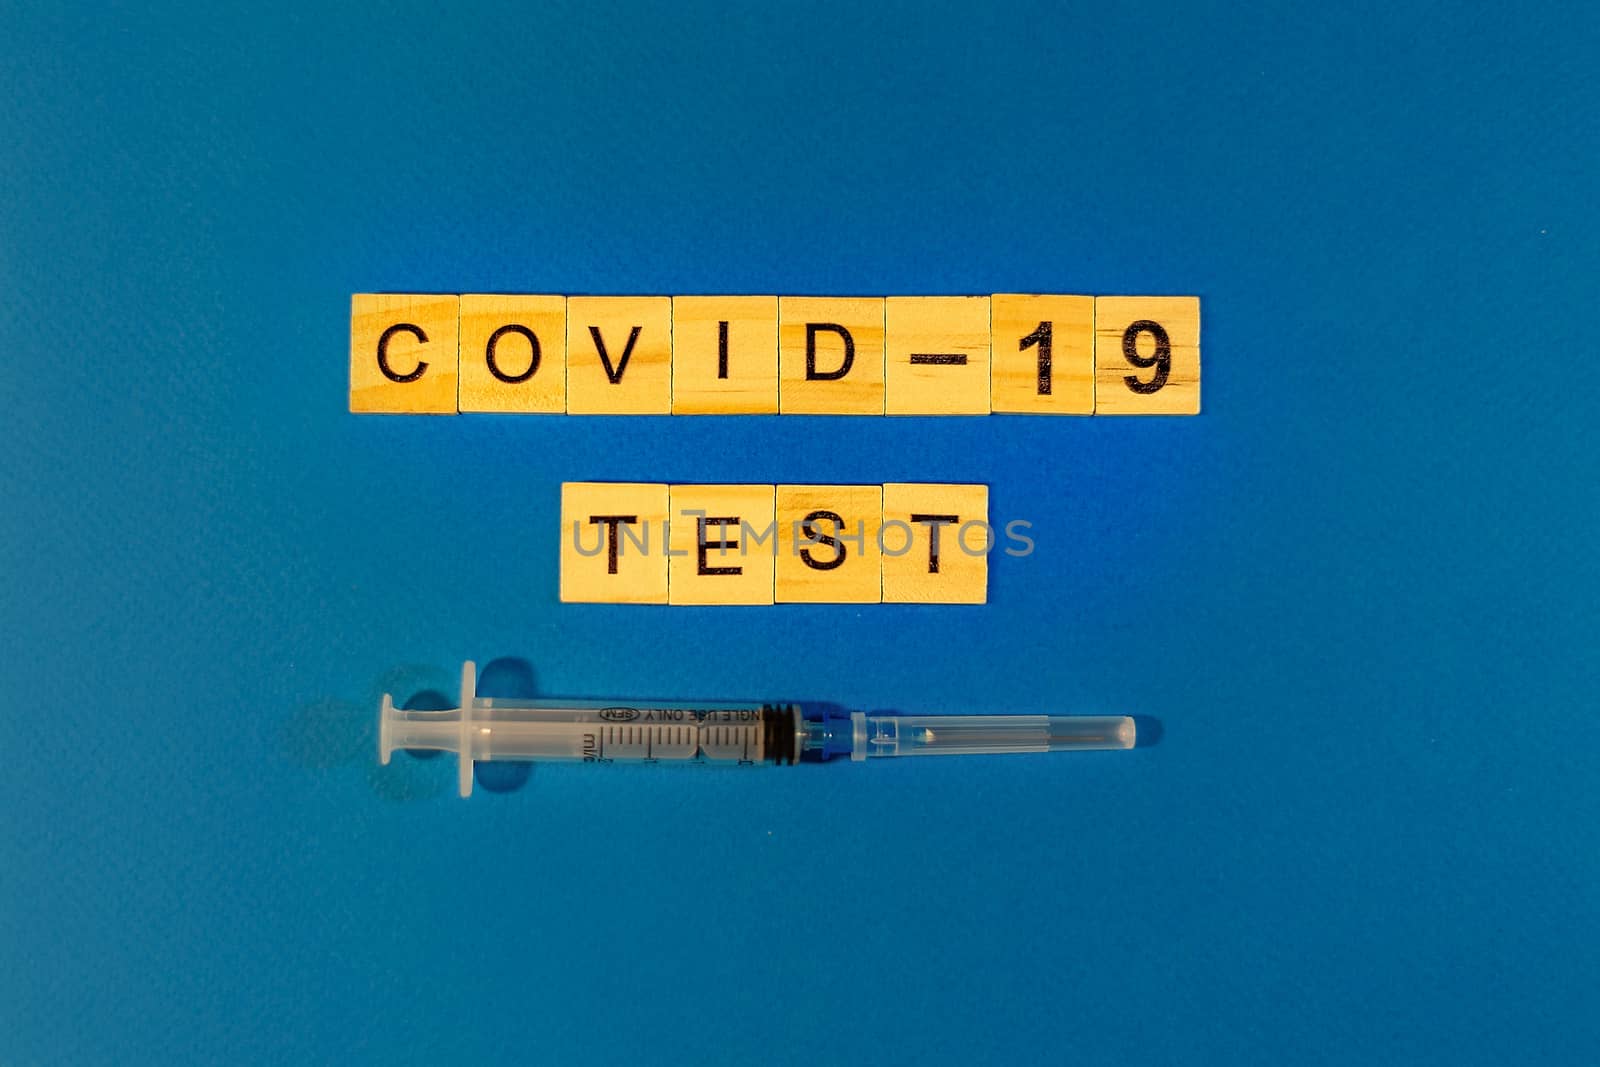 Virus Test of Coronavirus. Prevent or stop the spread of the COVID-19 worldwide. Letters test on blue background. flat lay, flat layout